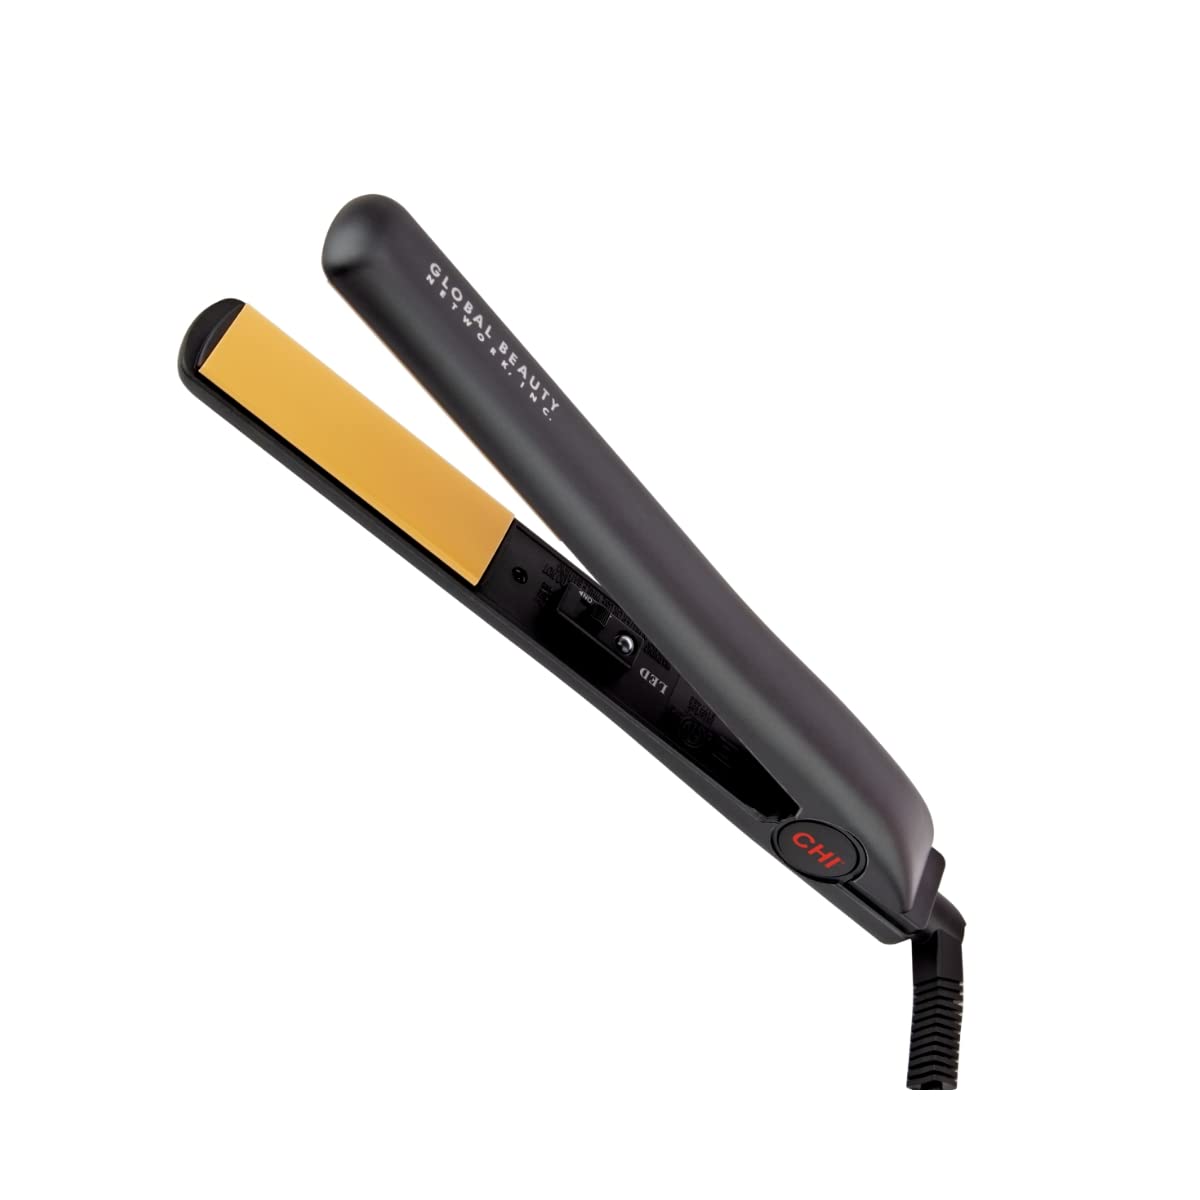 hair straightener detailed review